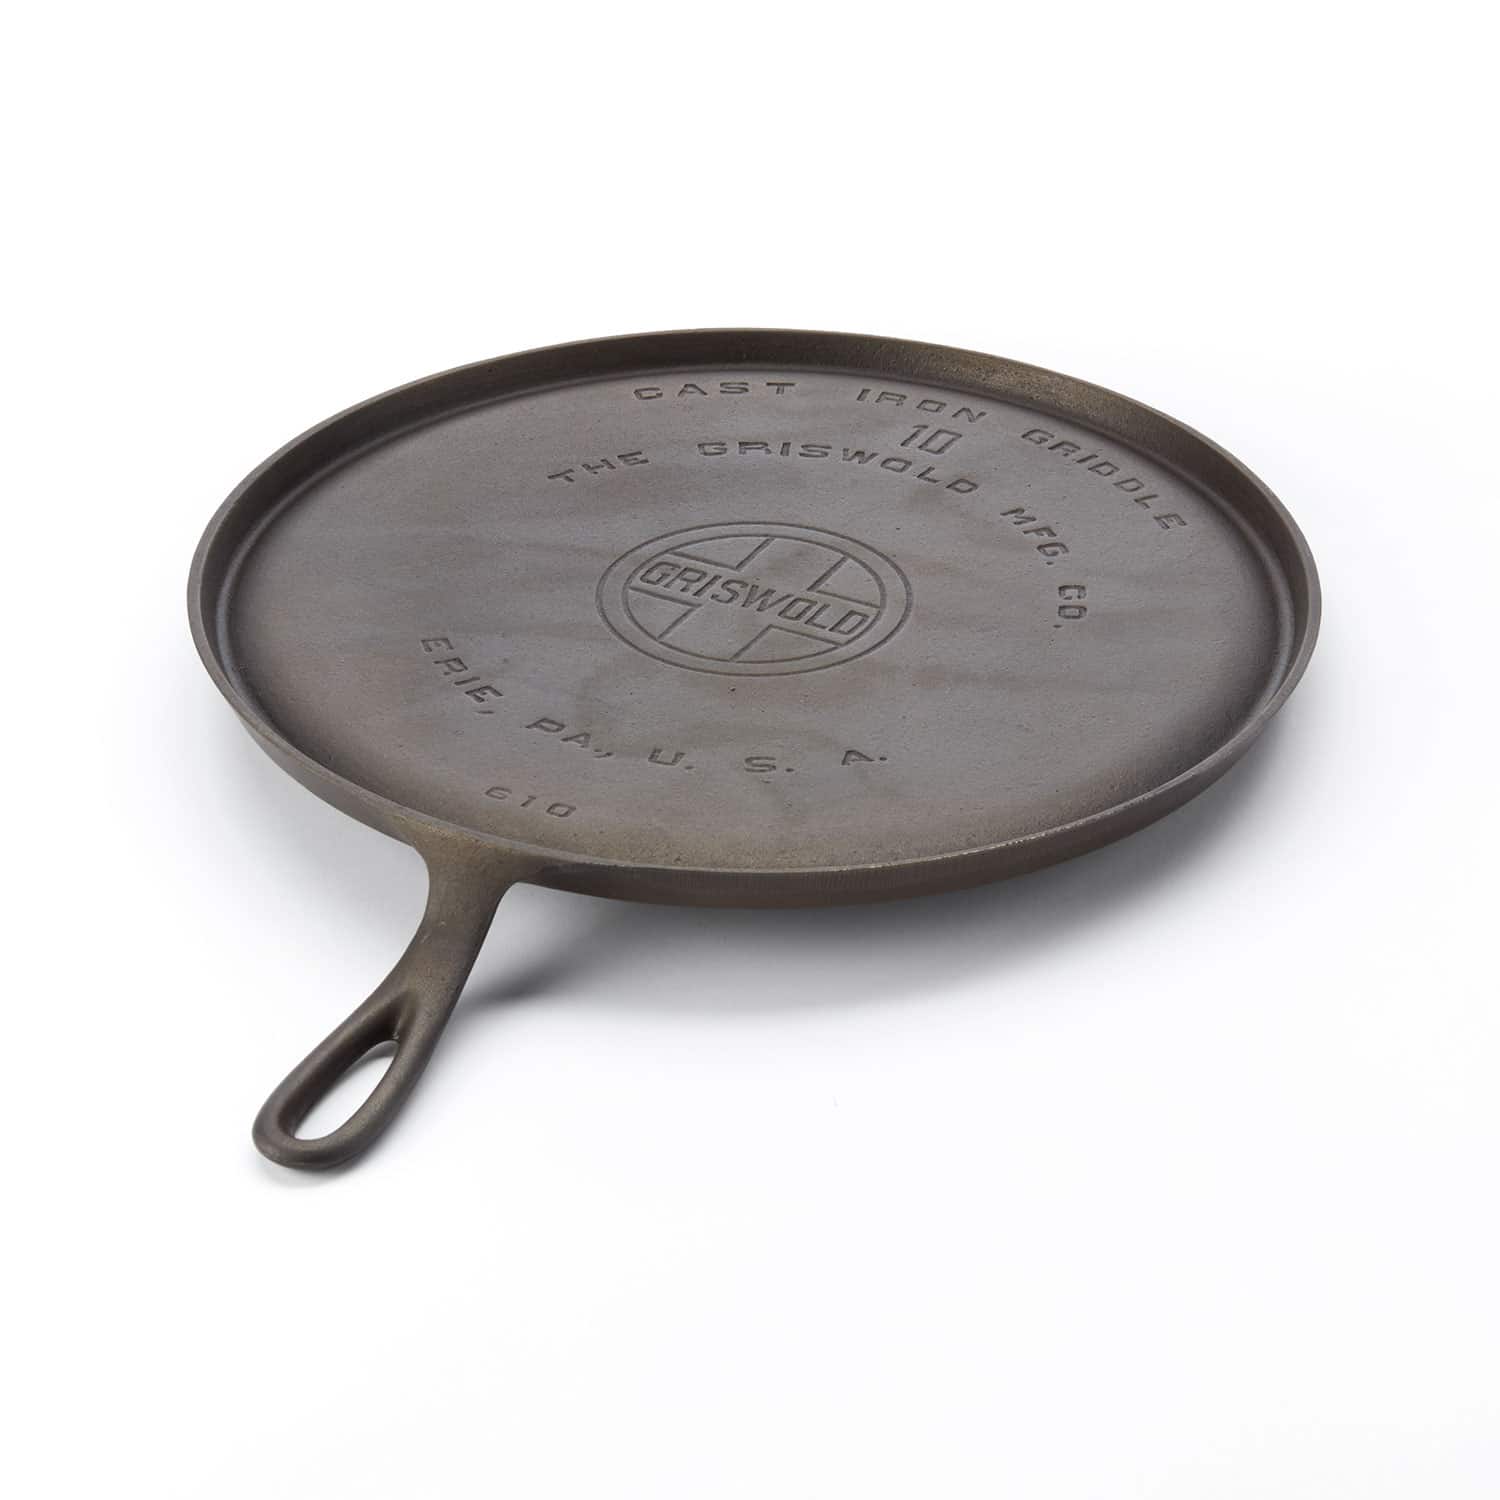 Cast Iron C (Vintage Griswold Square Skillet)  Rental for Photography at  Noho Surface and Prop